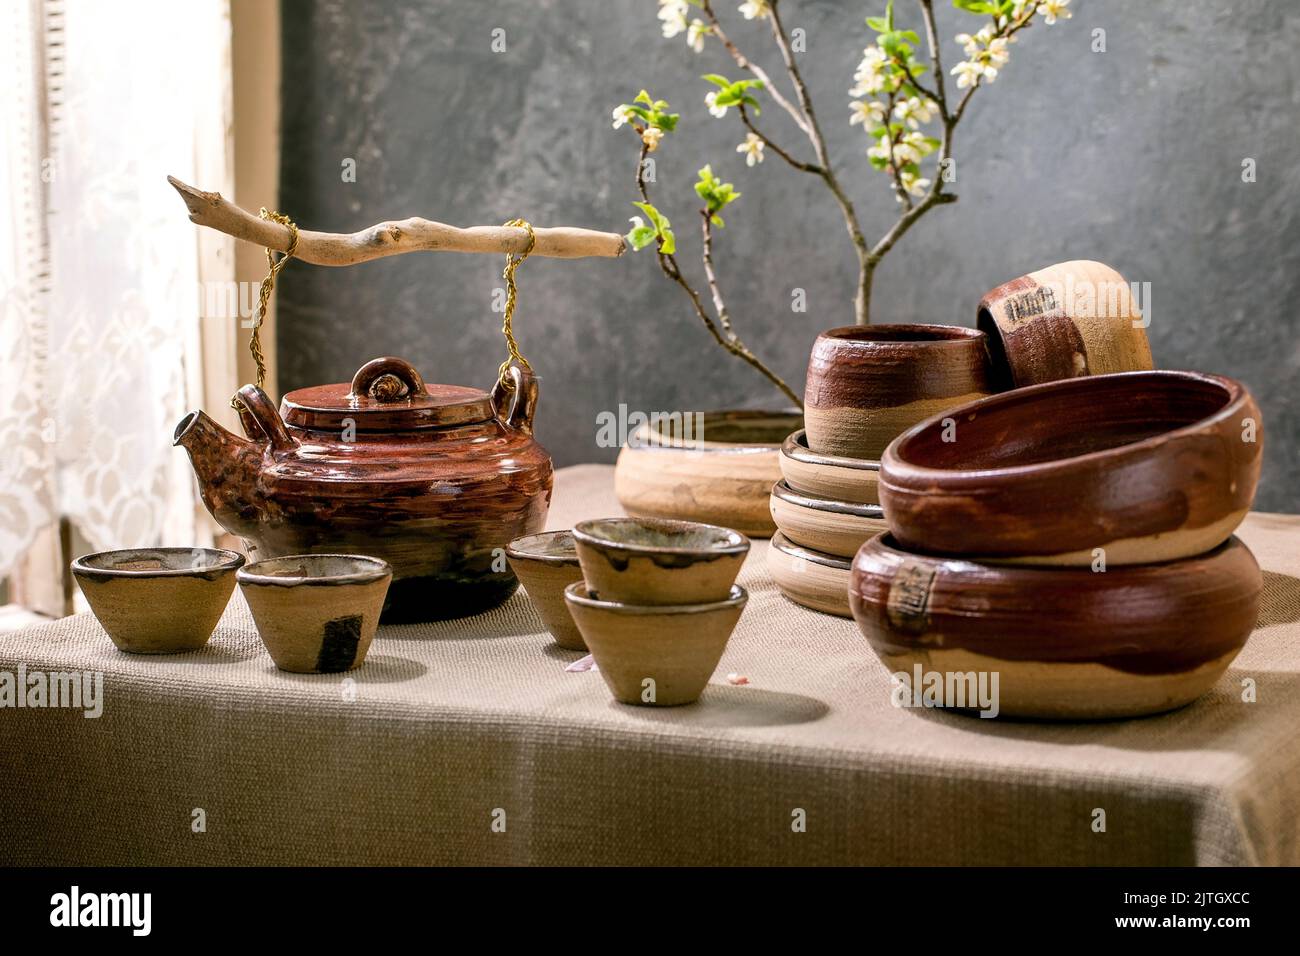 Japanese Asian style table setting with empty craft ceramic tableware, brown rough bowls and cups on linen tablecloth, decorated by ikebana spring flo Stock Photo